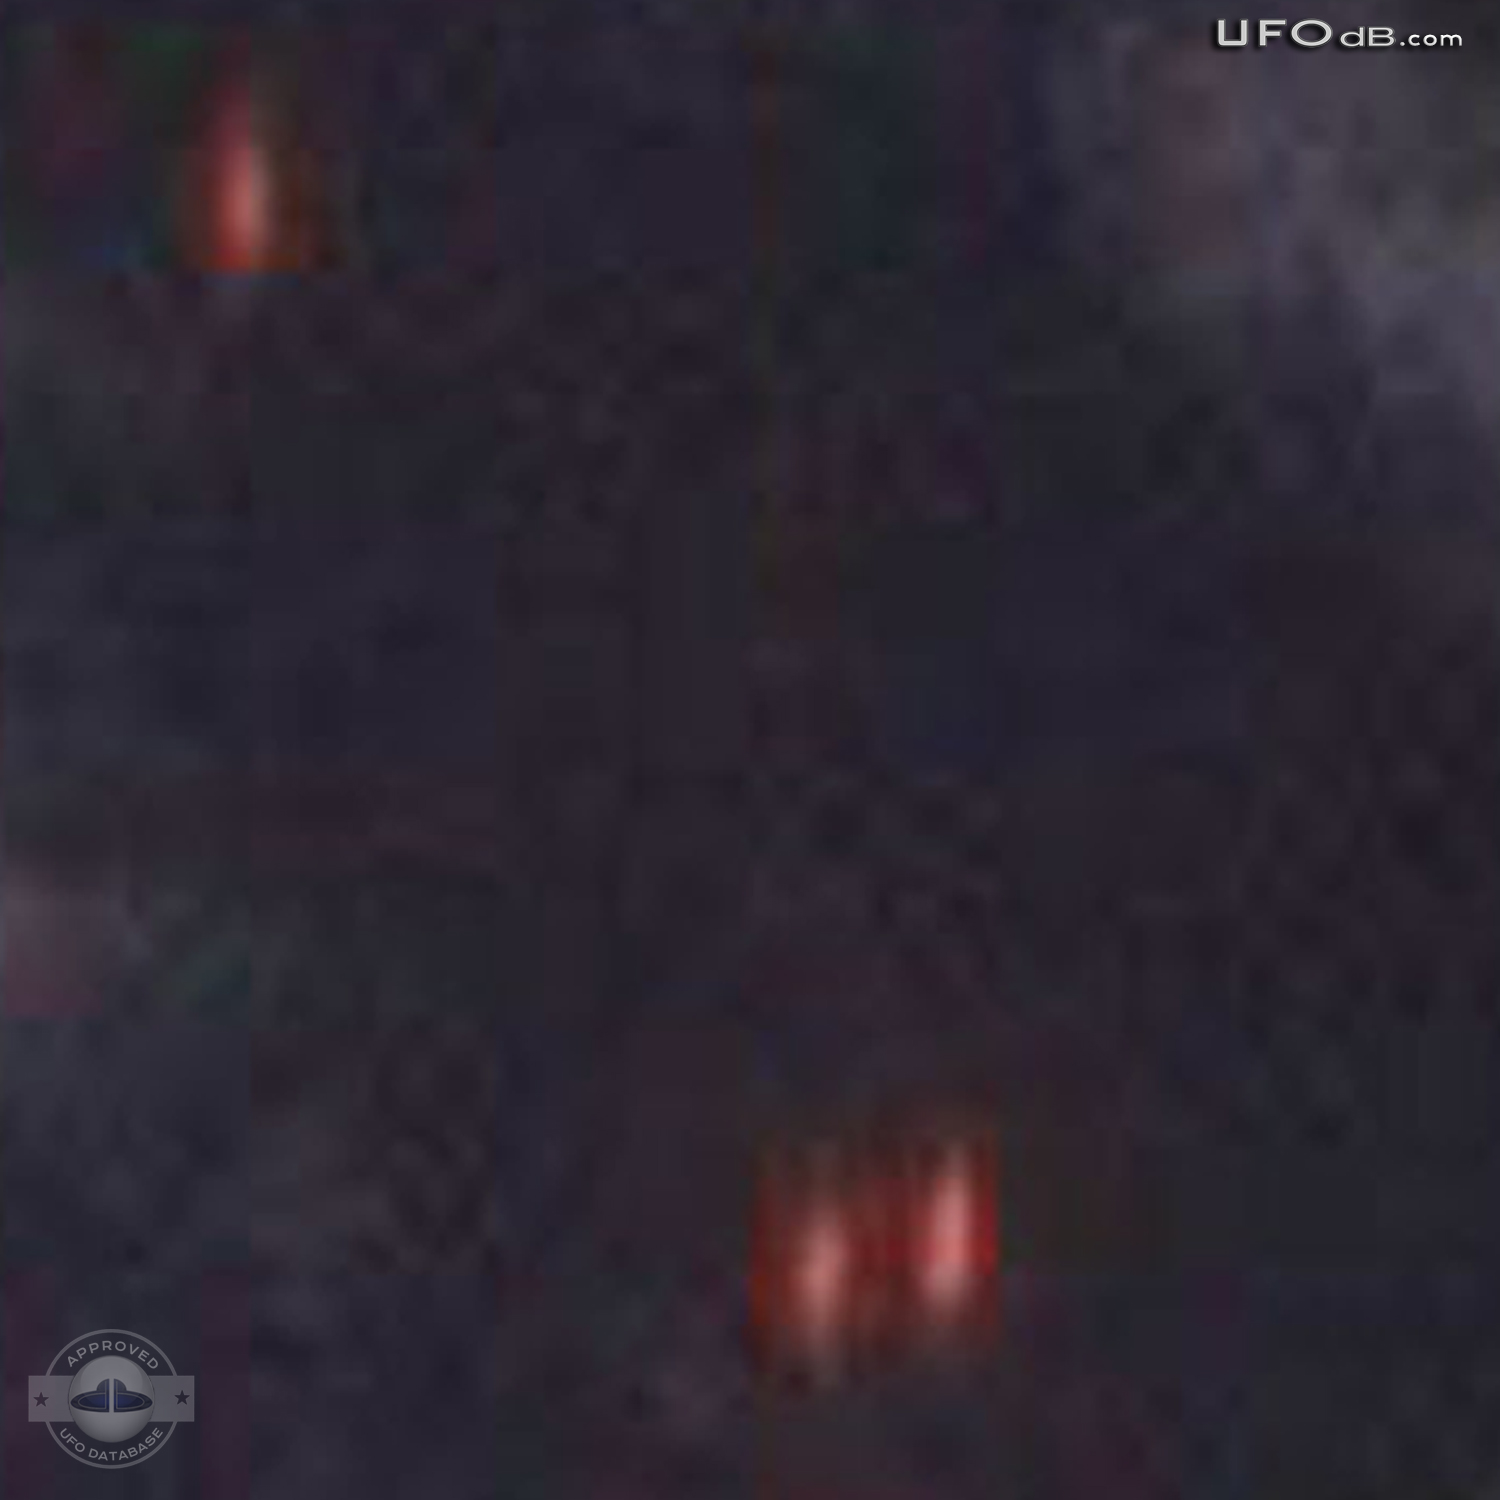 Light Pillars UFOs seen as Heavenly Signs in Bahrain | March 18 2011 UFO Picture #318-5